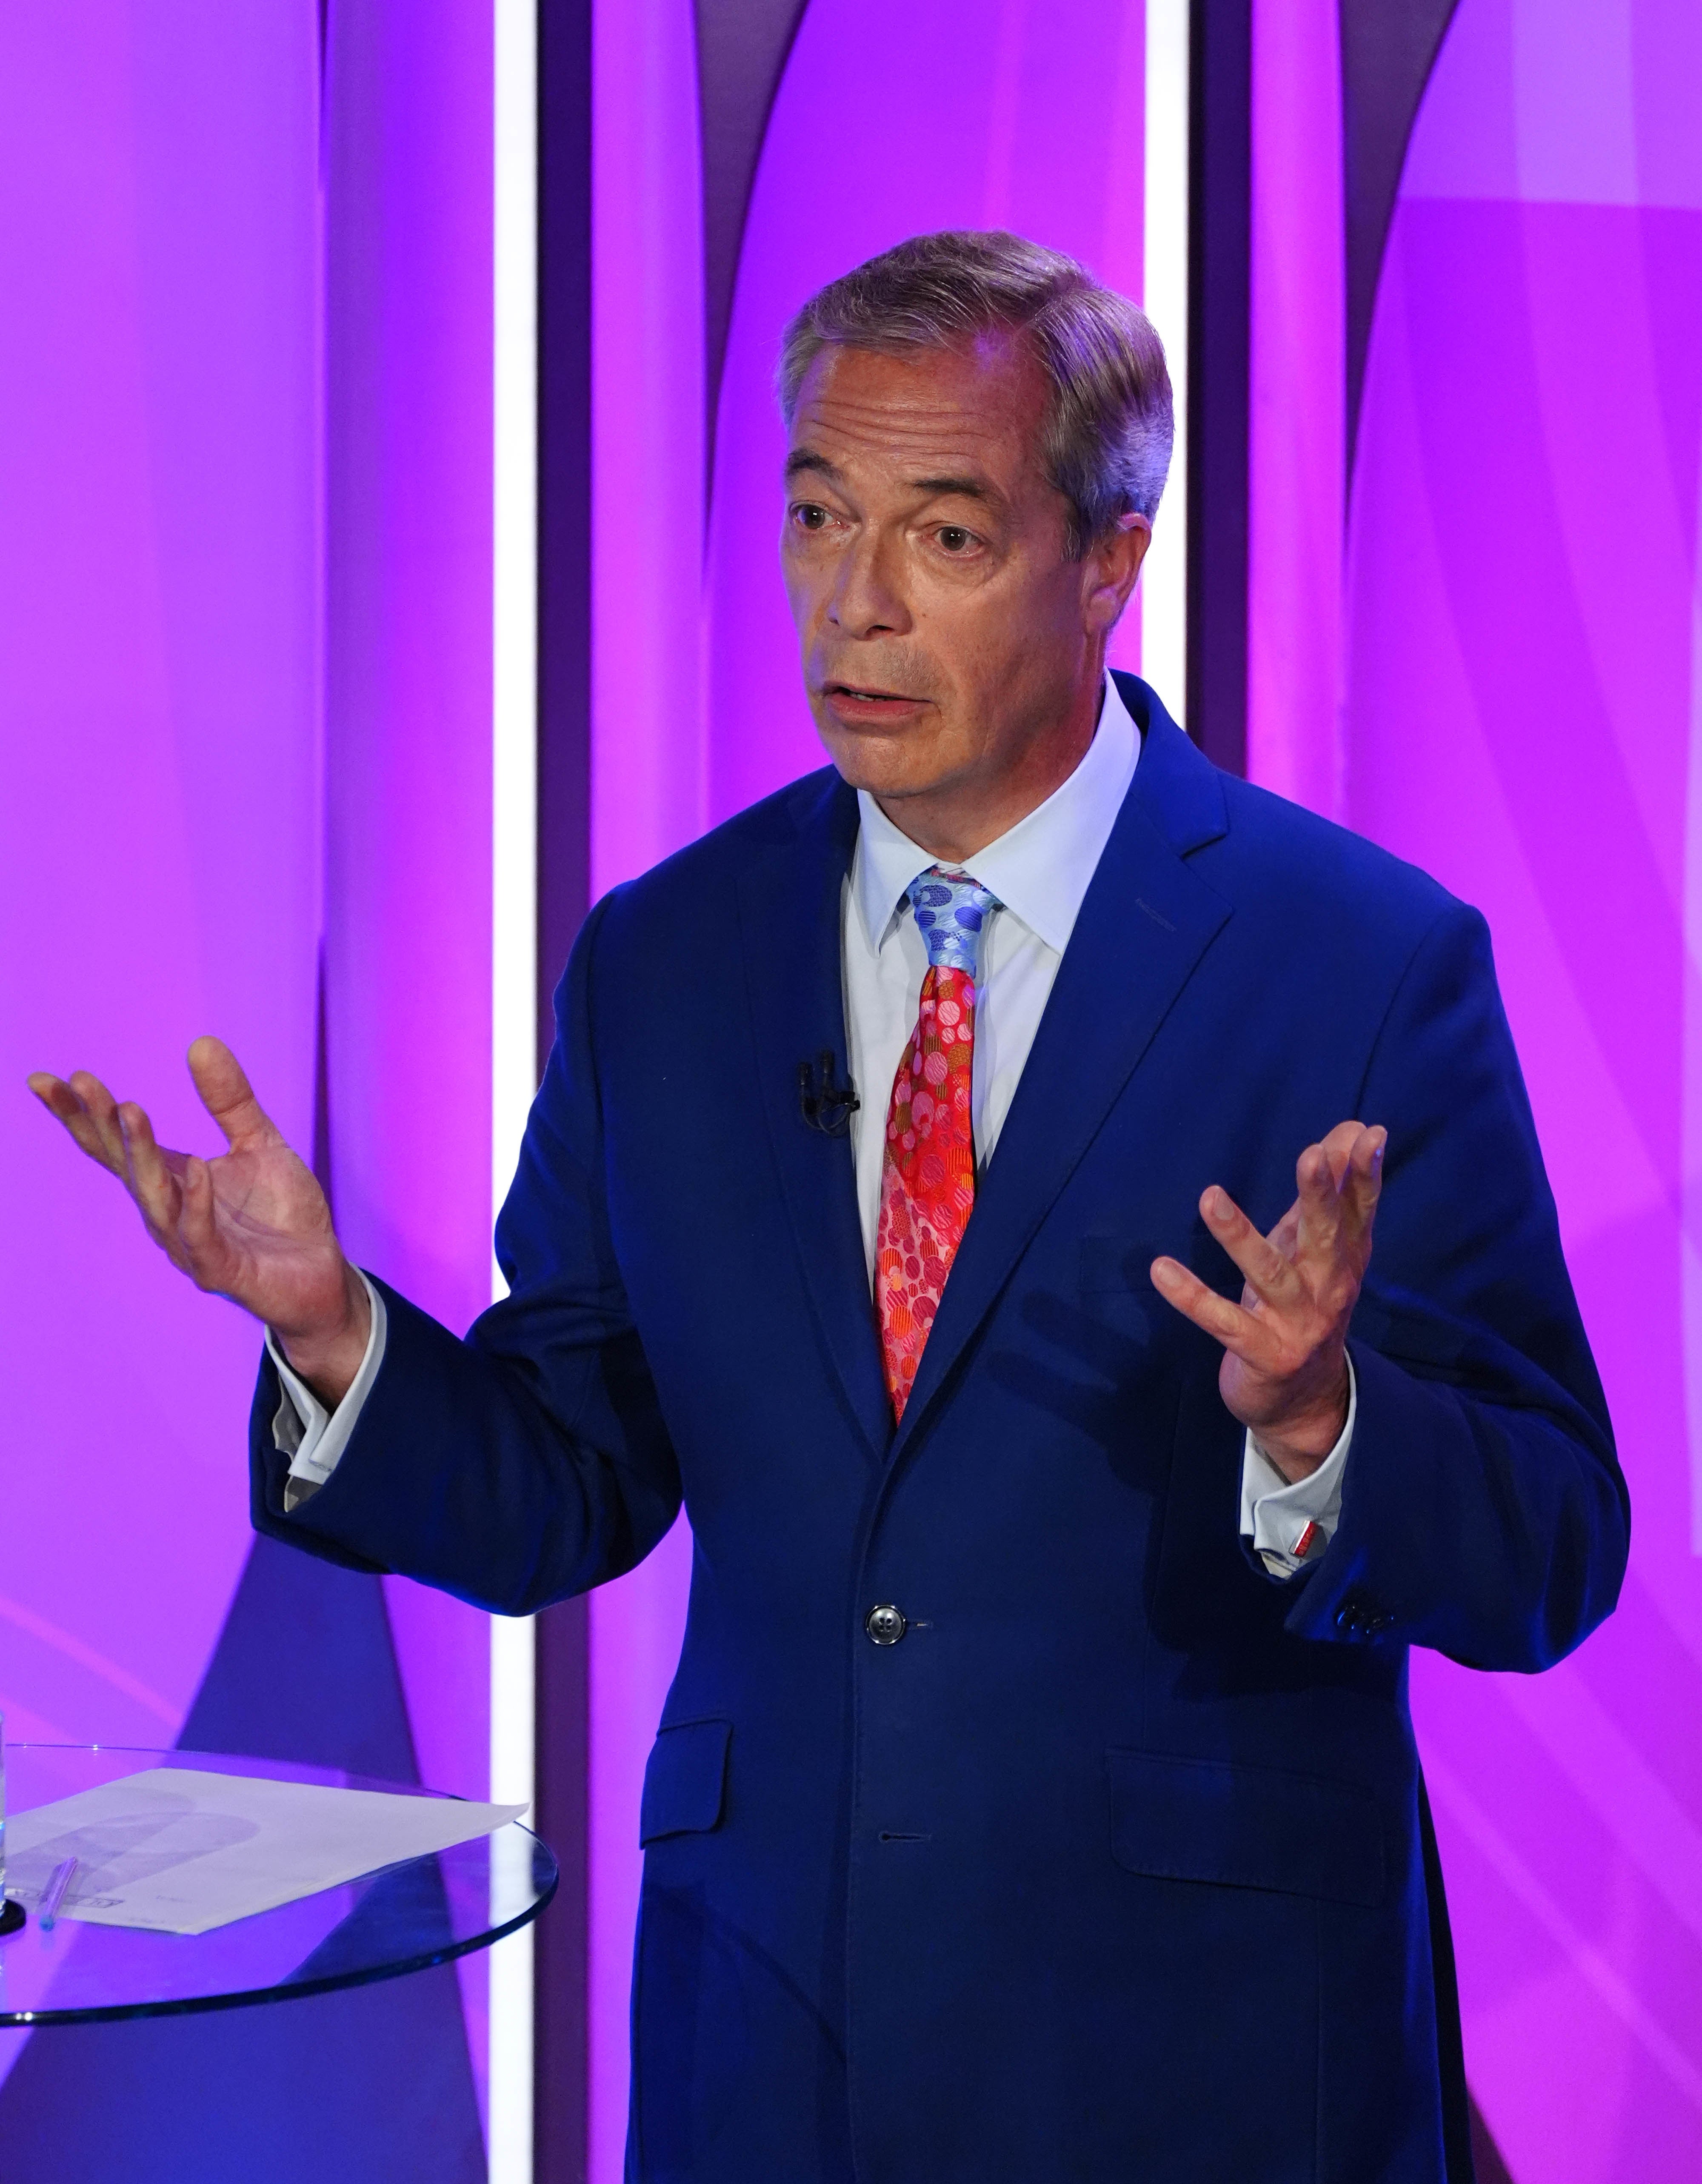 Reform UK Leader Nigel Farage speaks during a BBC Question Time Leaders’ Special at the Midlands Arts Centre in Birmingham (Peter Byrne/PA)